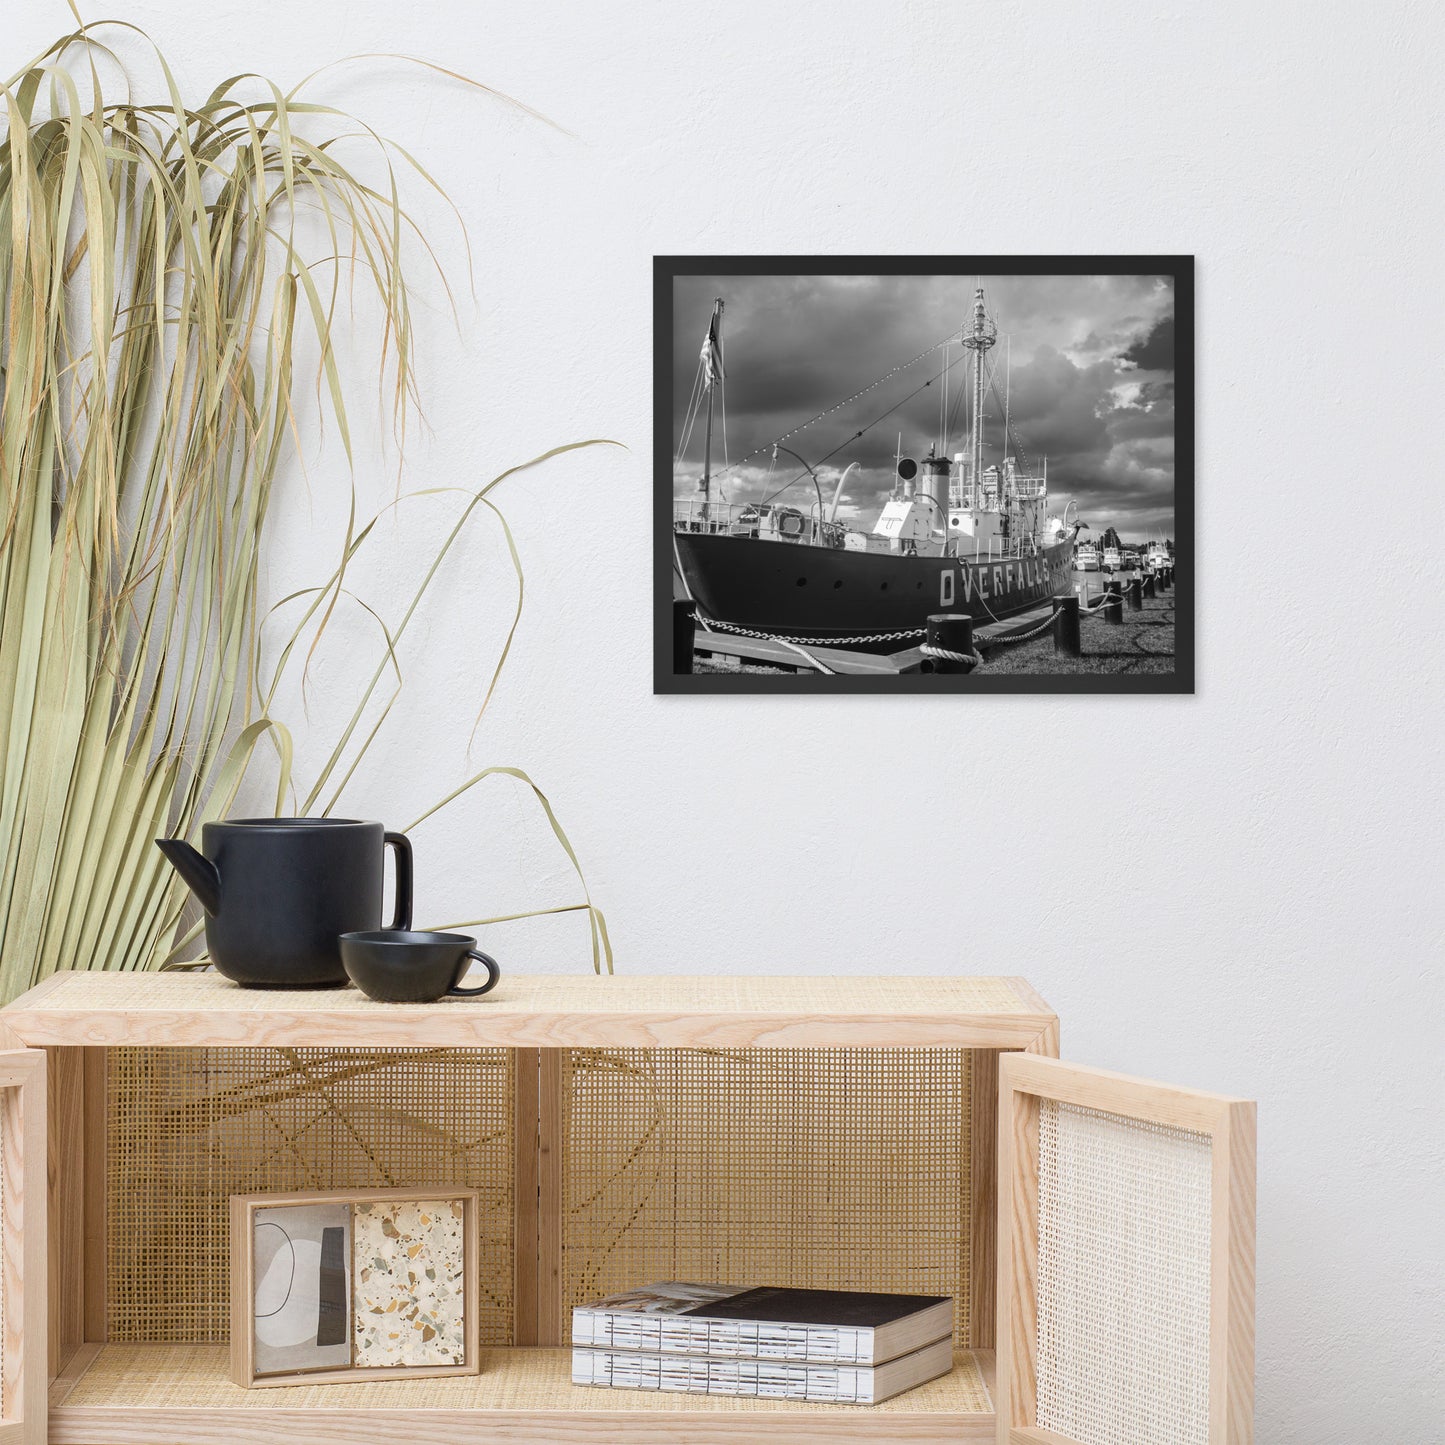 Overfalls Lightship Lewes Black and White Framed Photo Paper Wall Art Prints